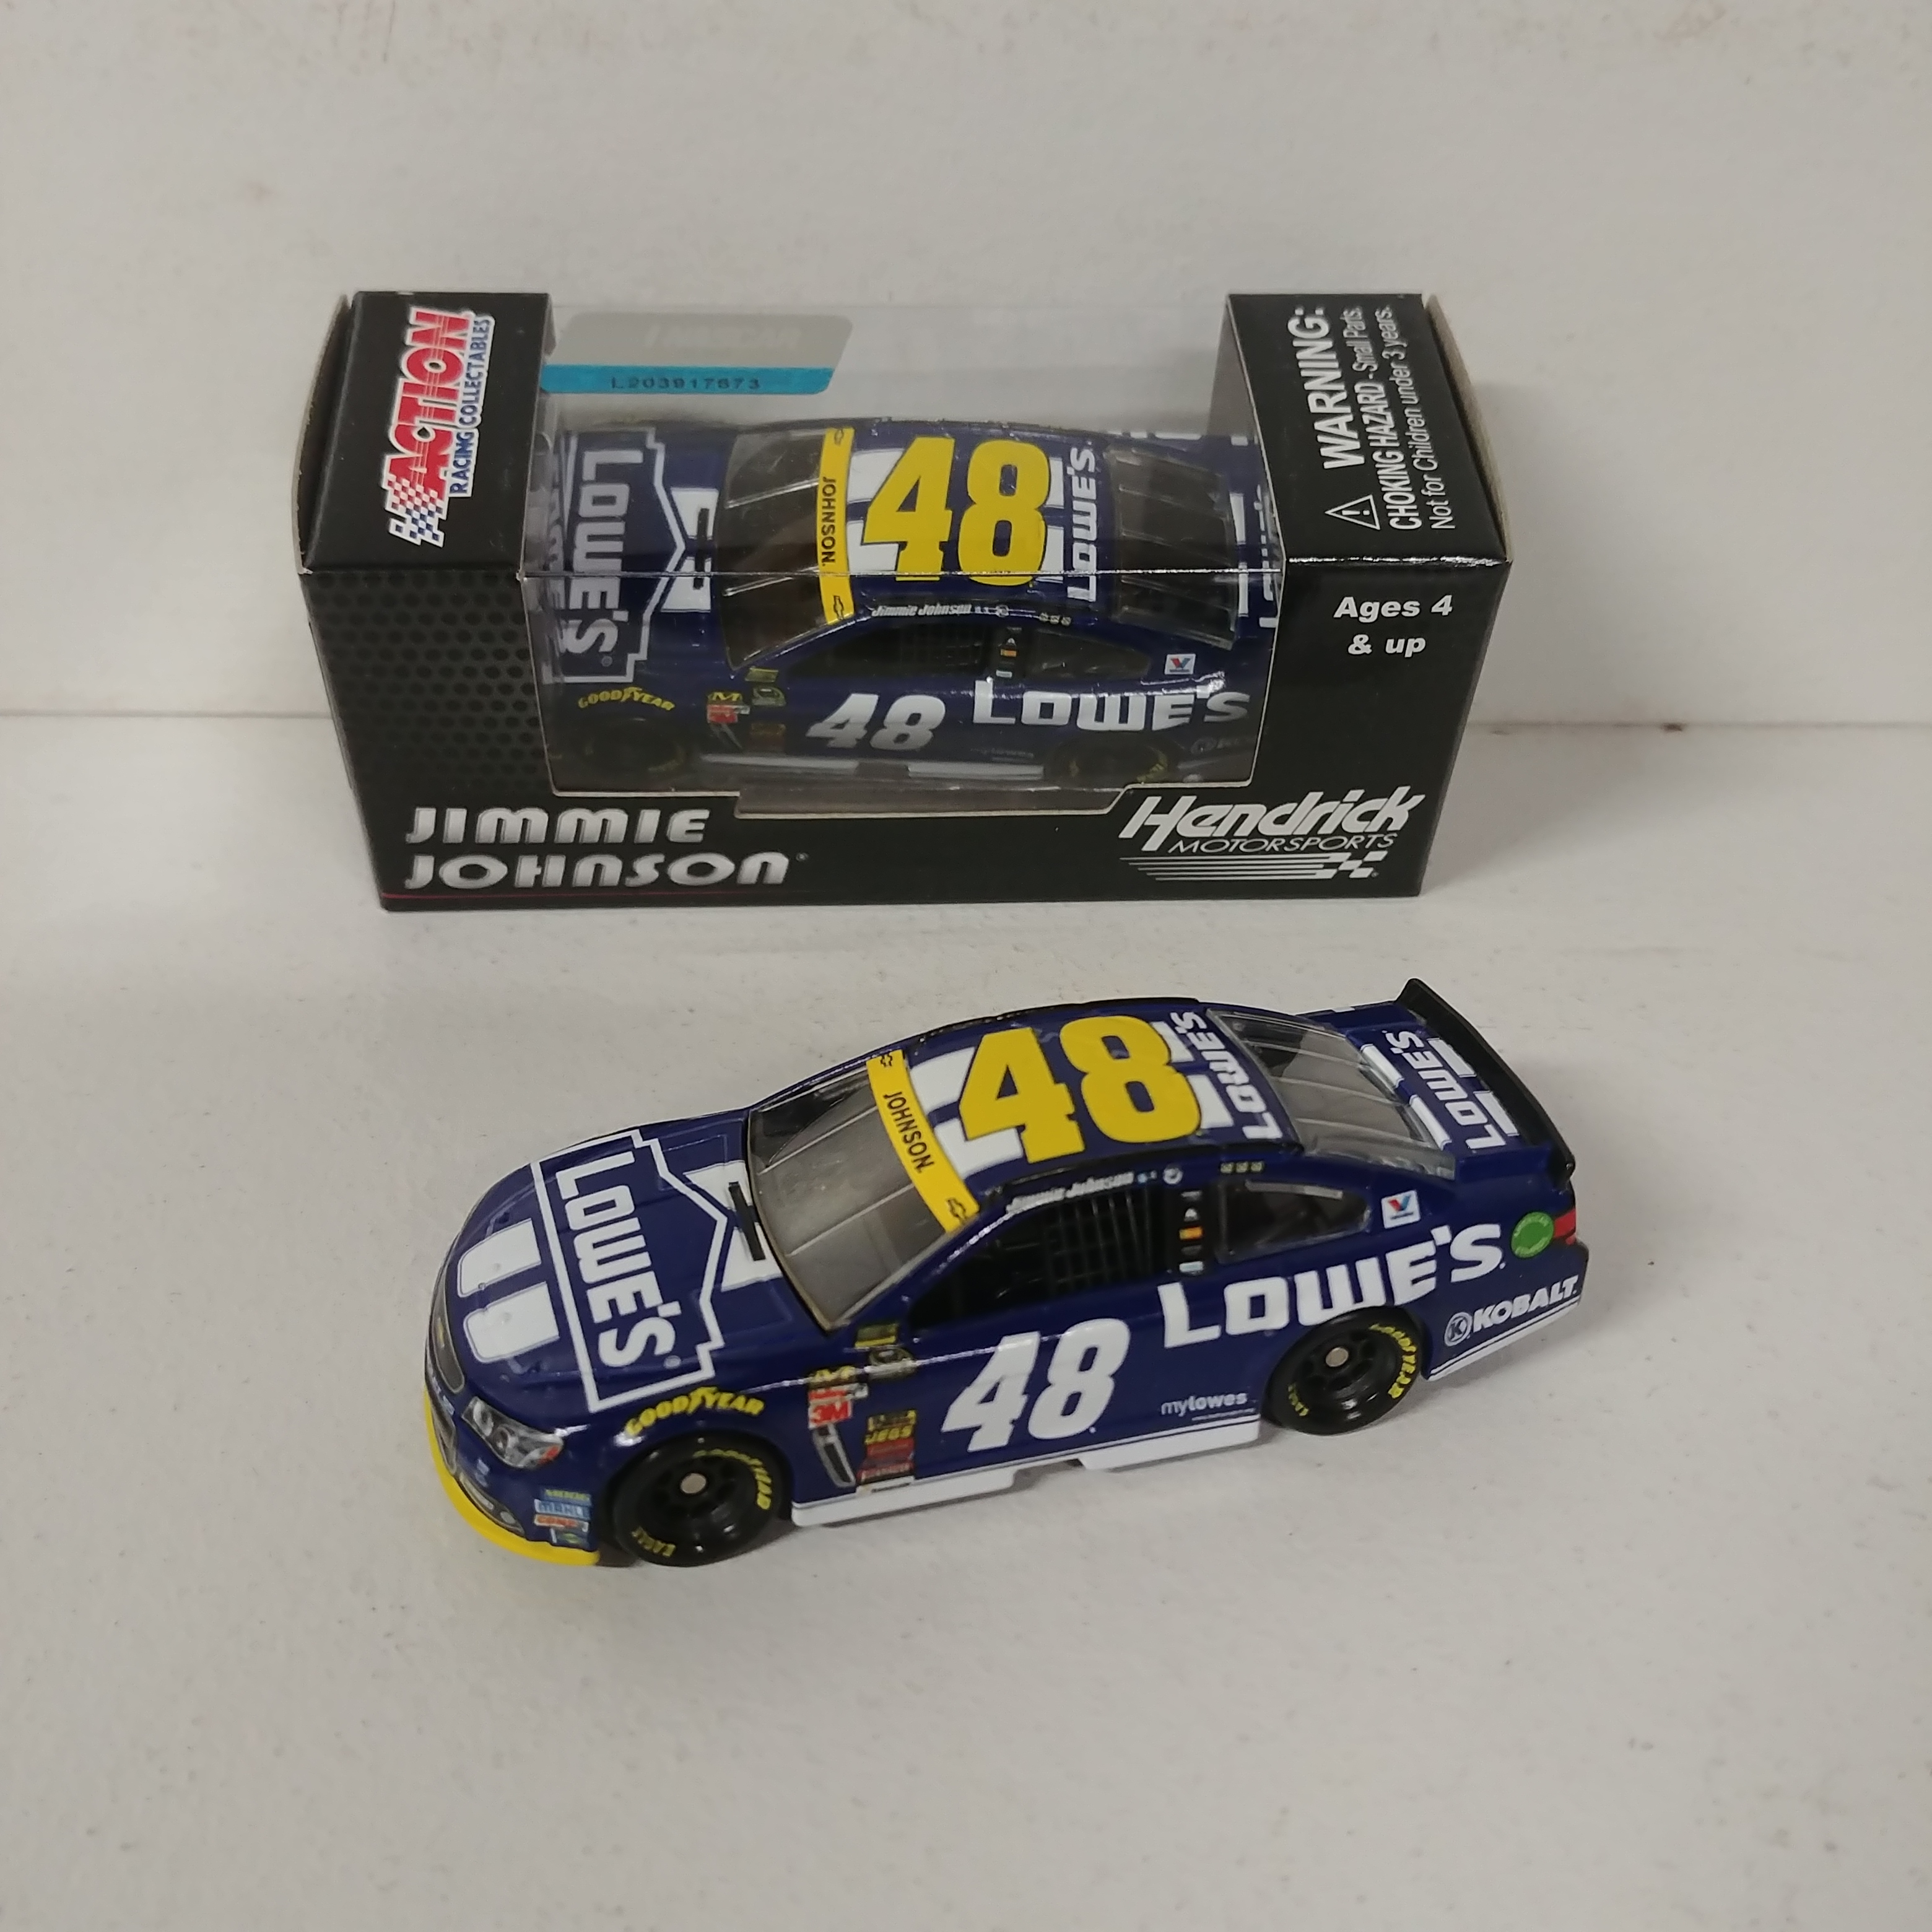 2014 Jimmie Johnson 1/64th Lowe's "Chase" Pitstop Series car